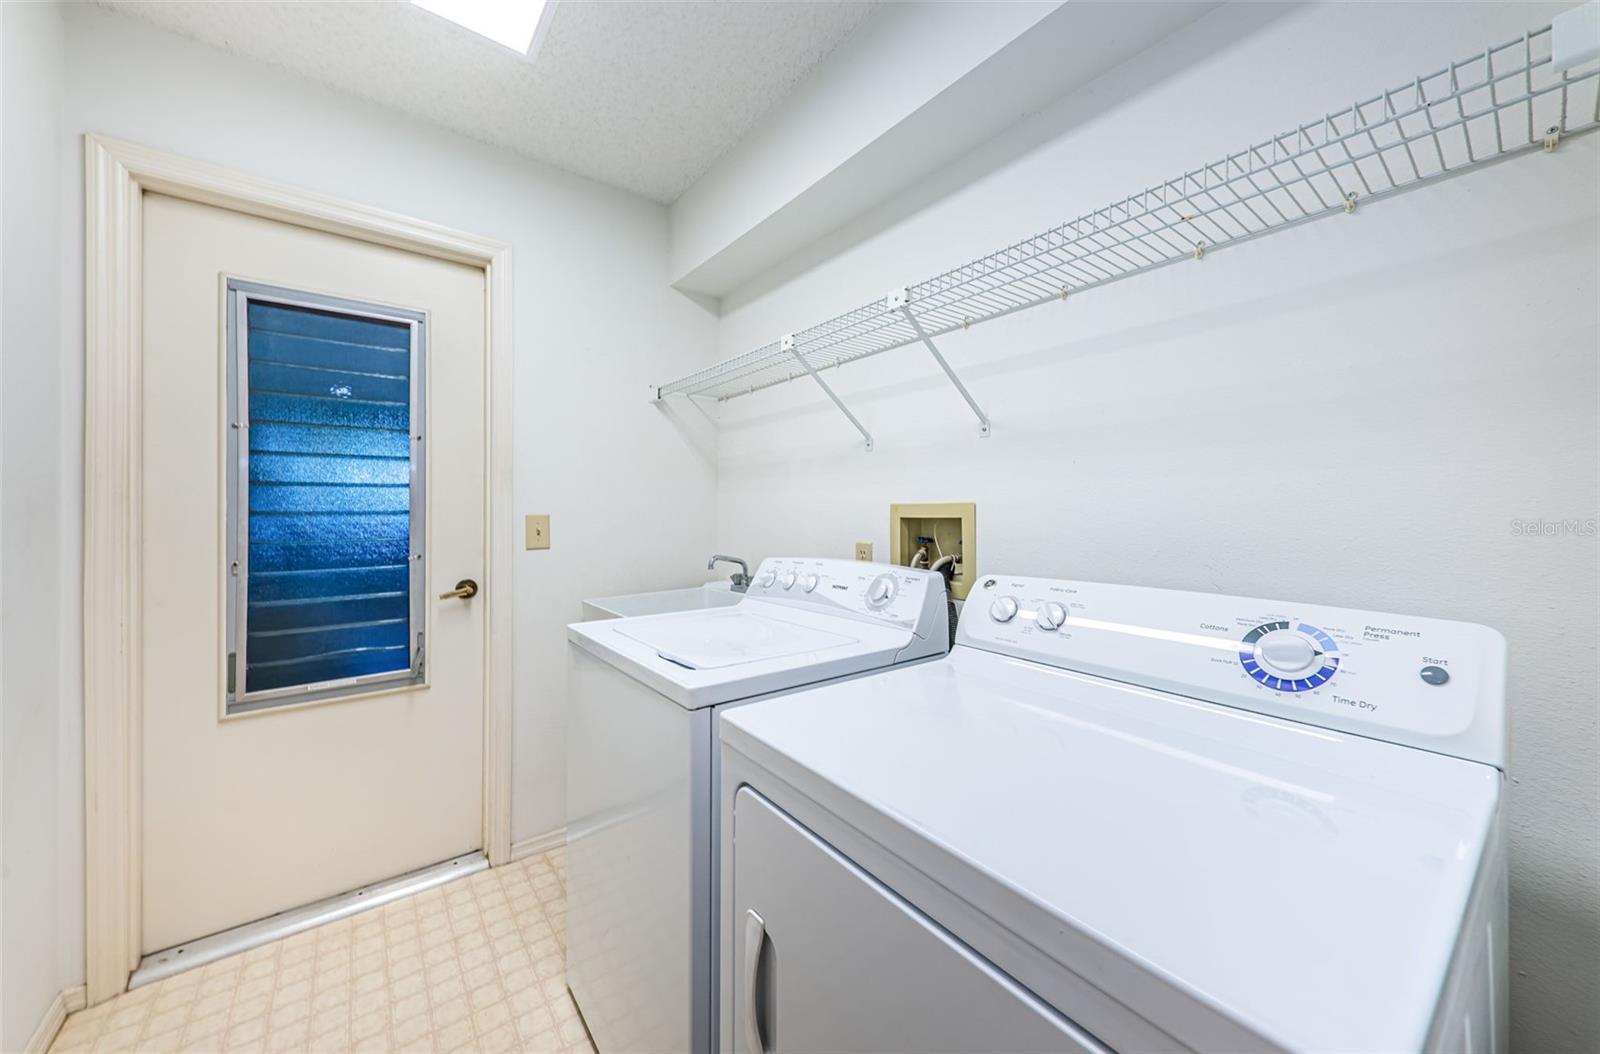 Laundry room includes washer and dryer - laundry sink